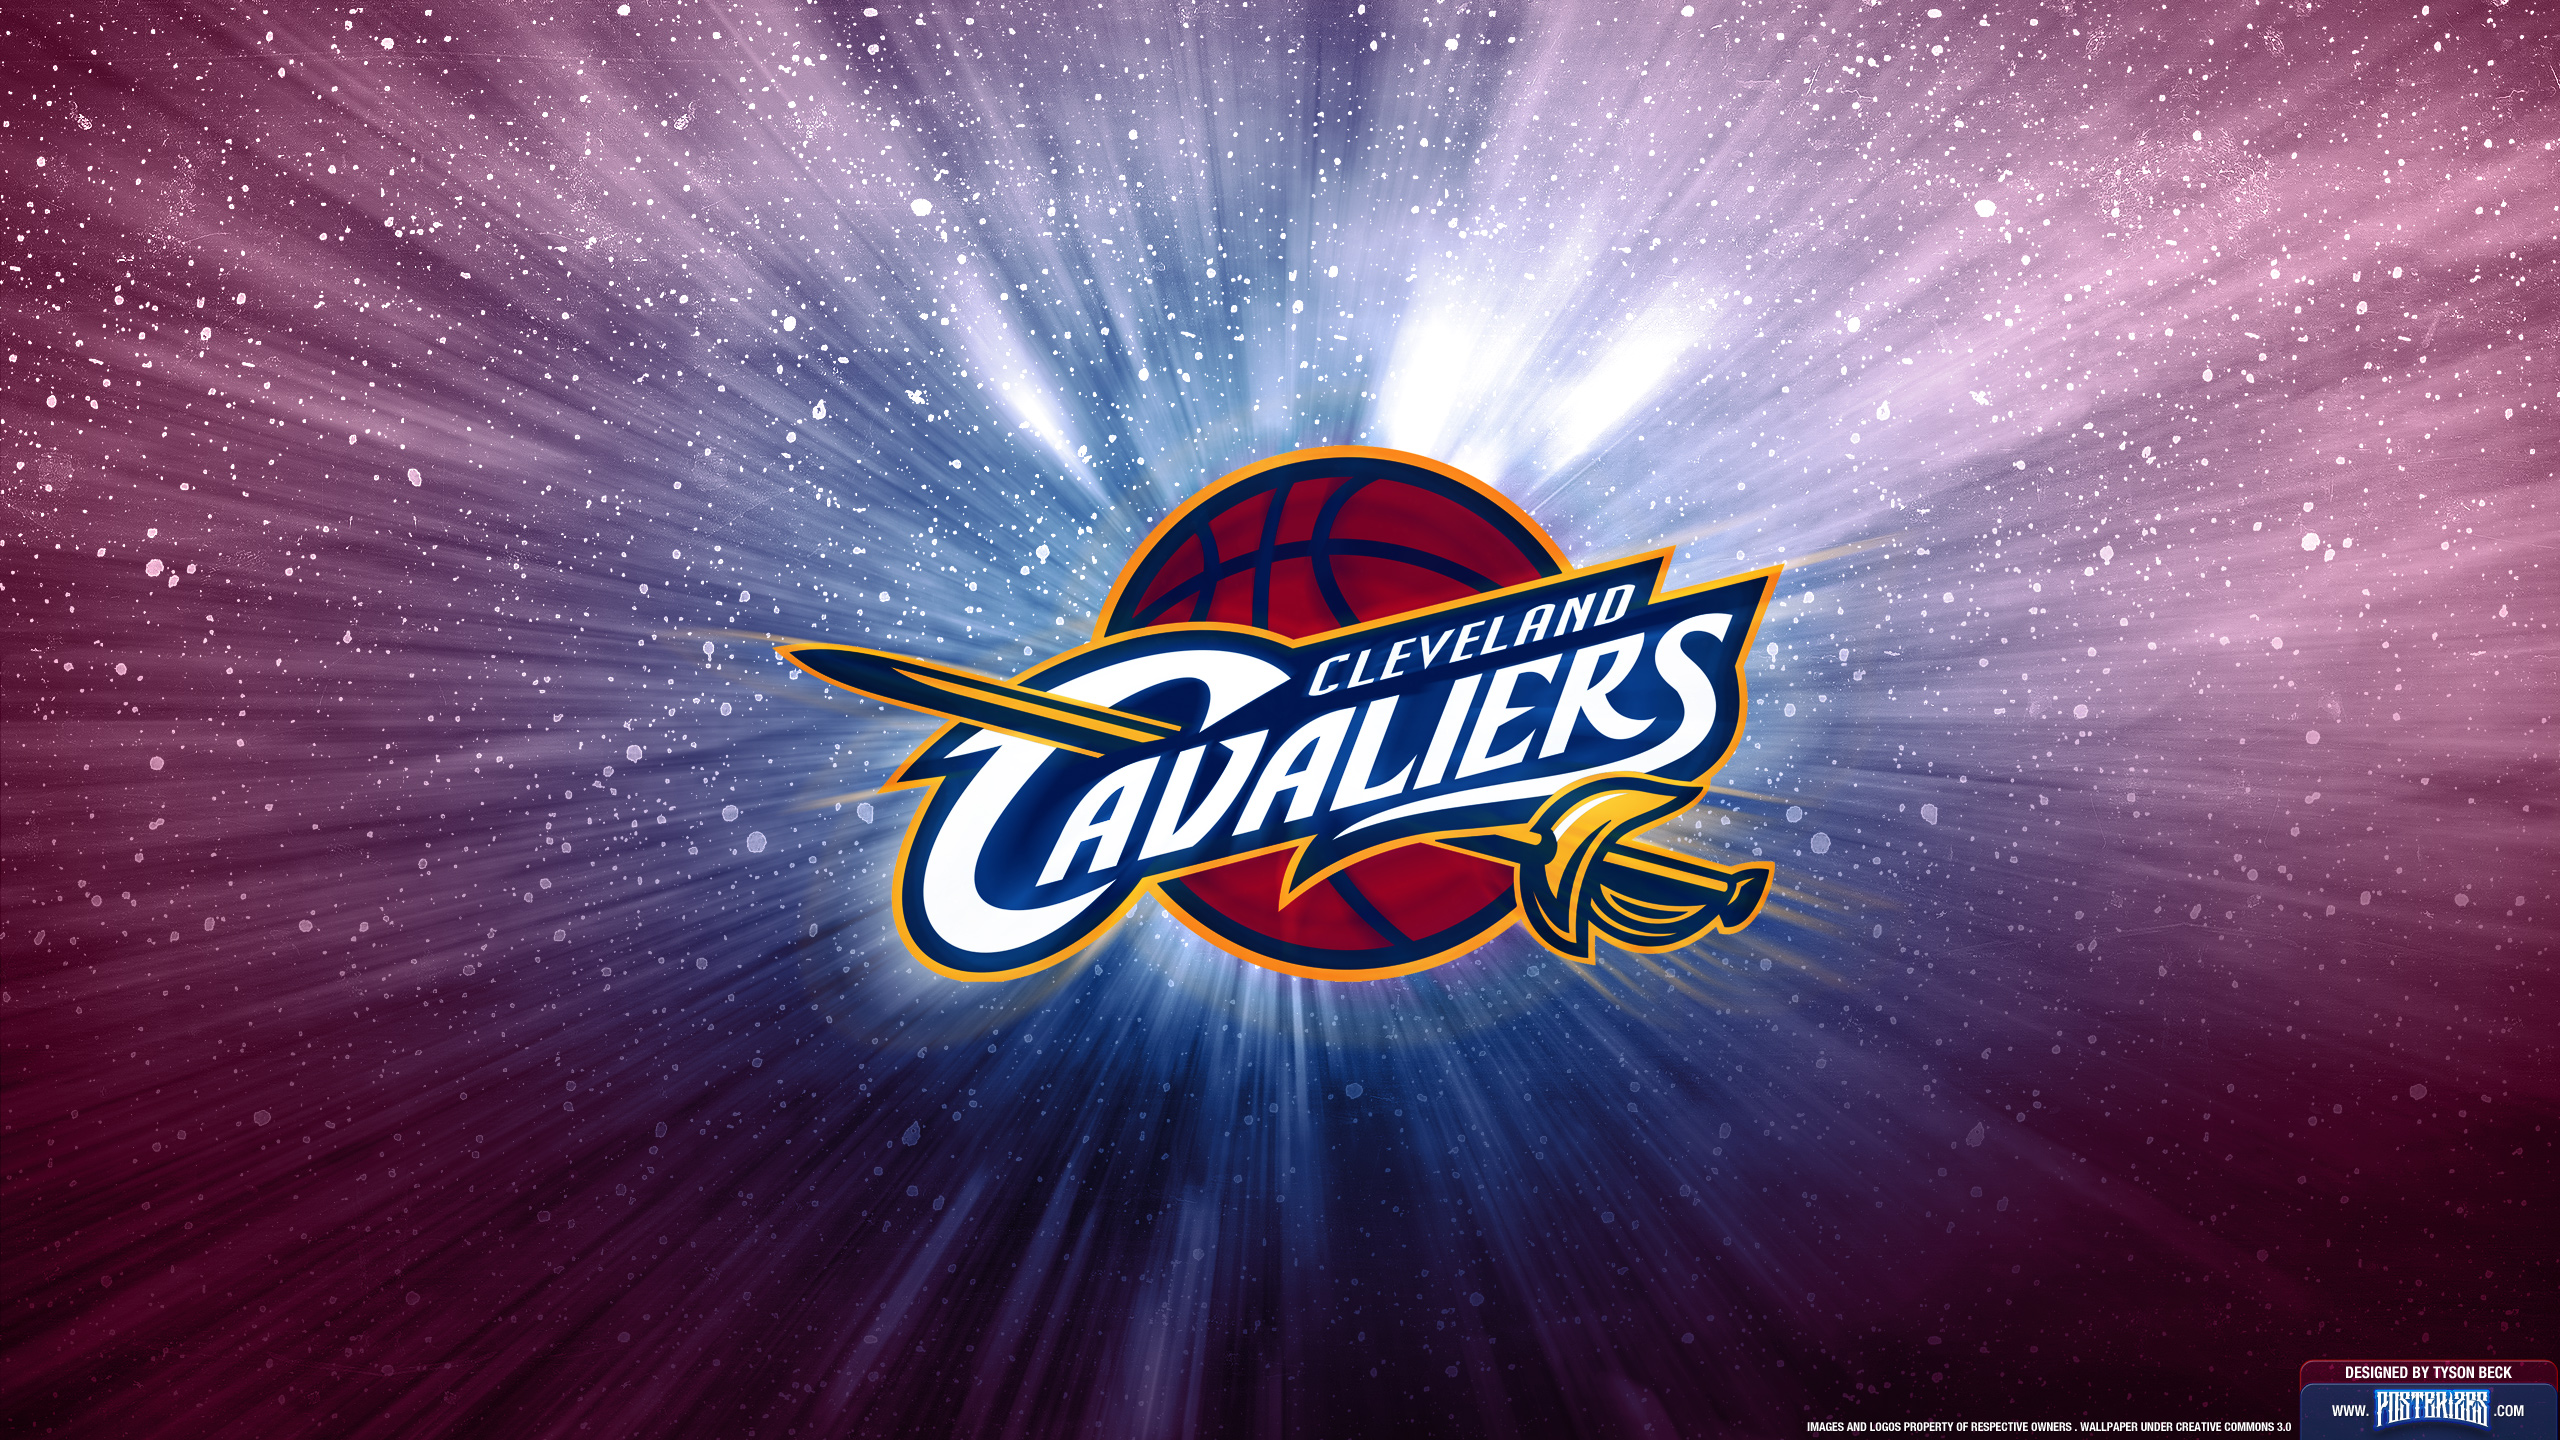 Cleveland Cavaliers Wallpaper 7i8 Px Mb